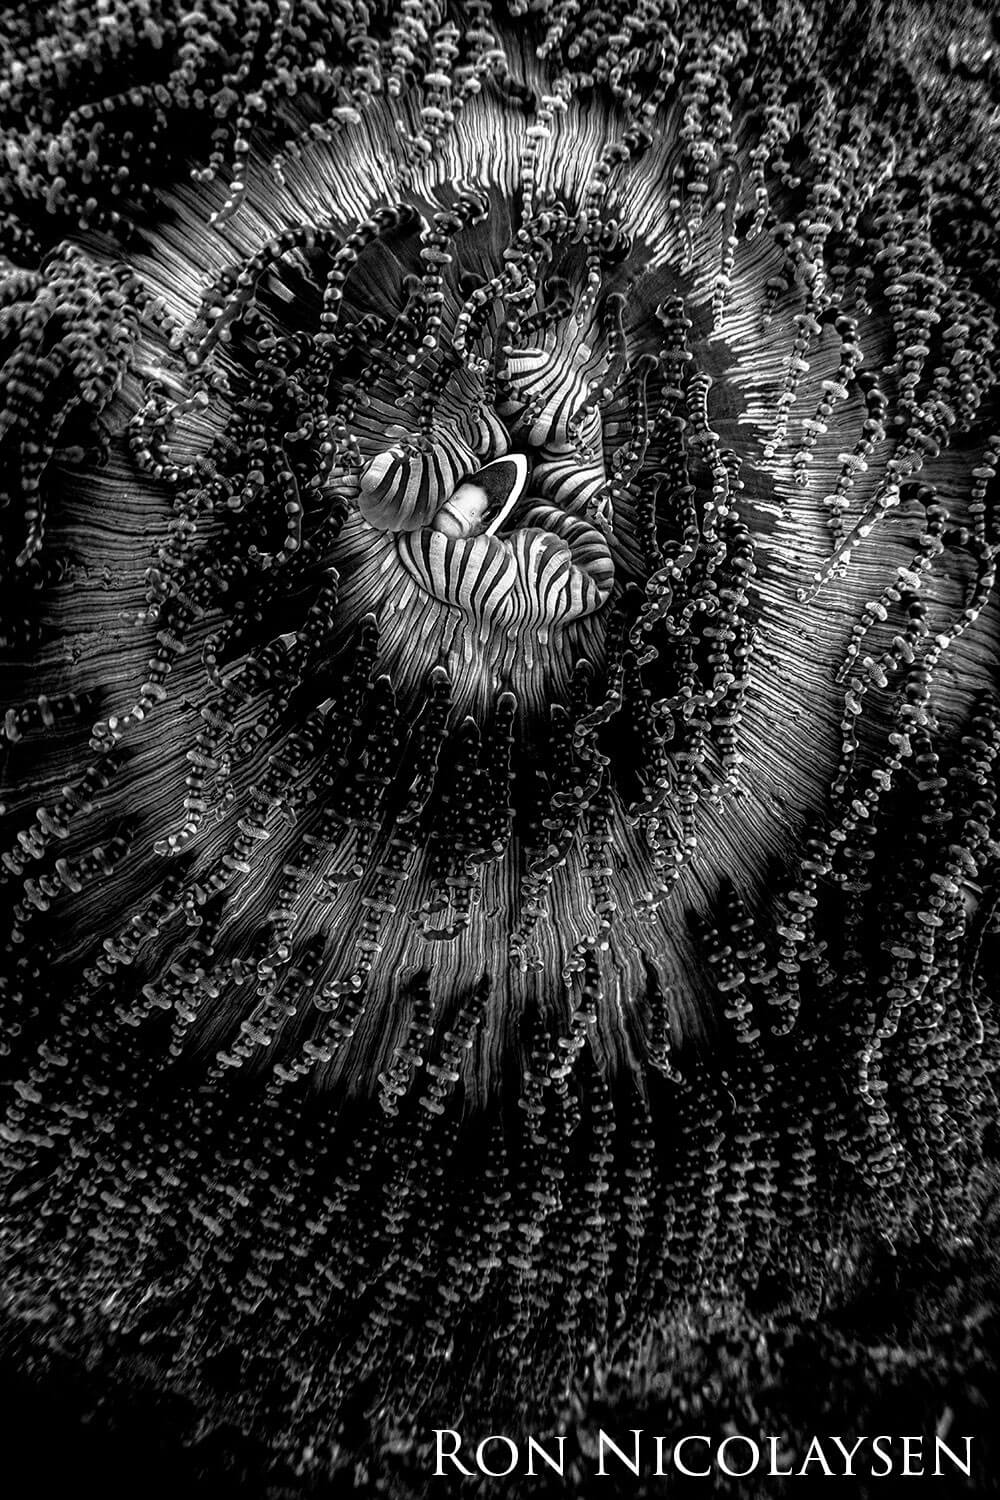 Black and white image of a fish inside an anemone.